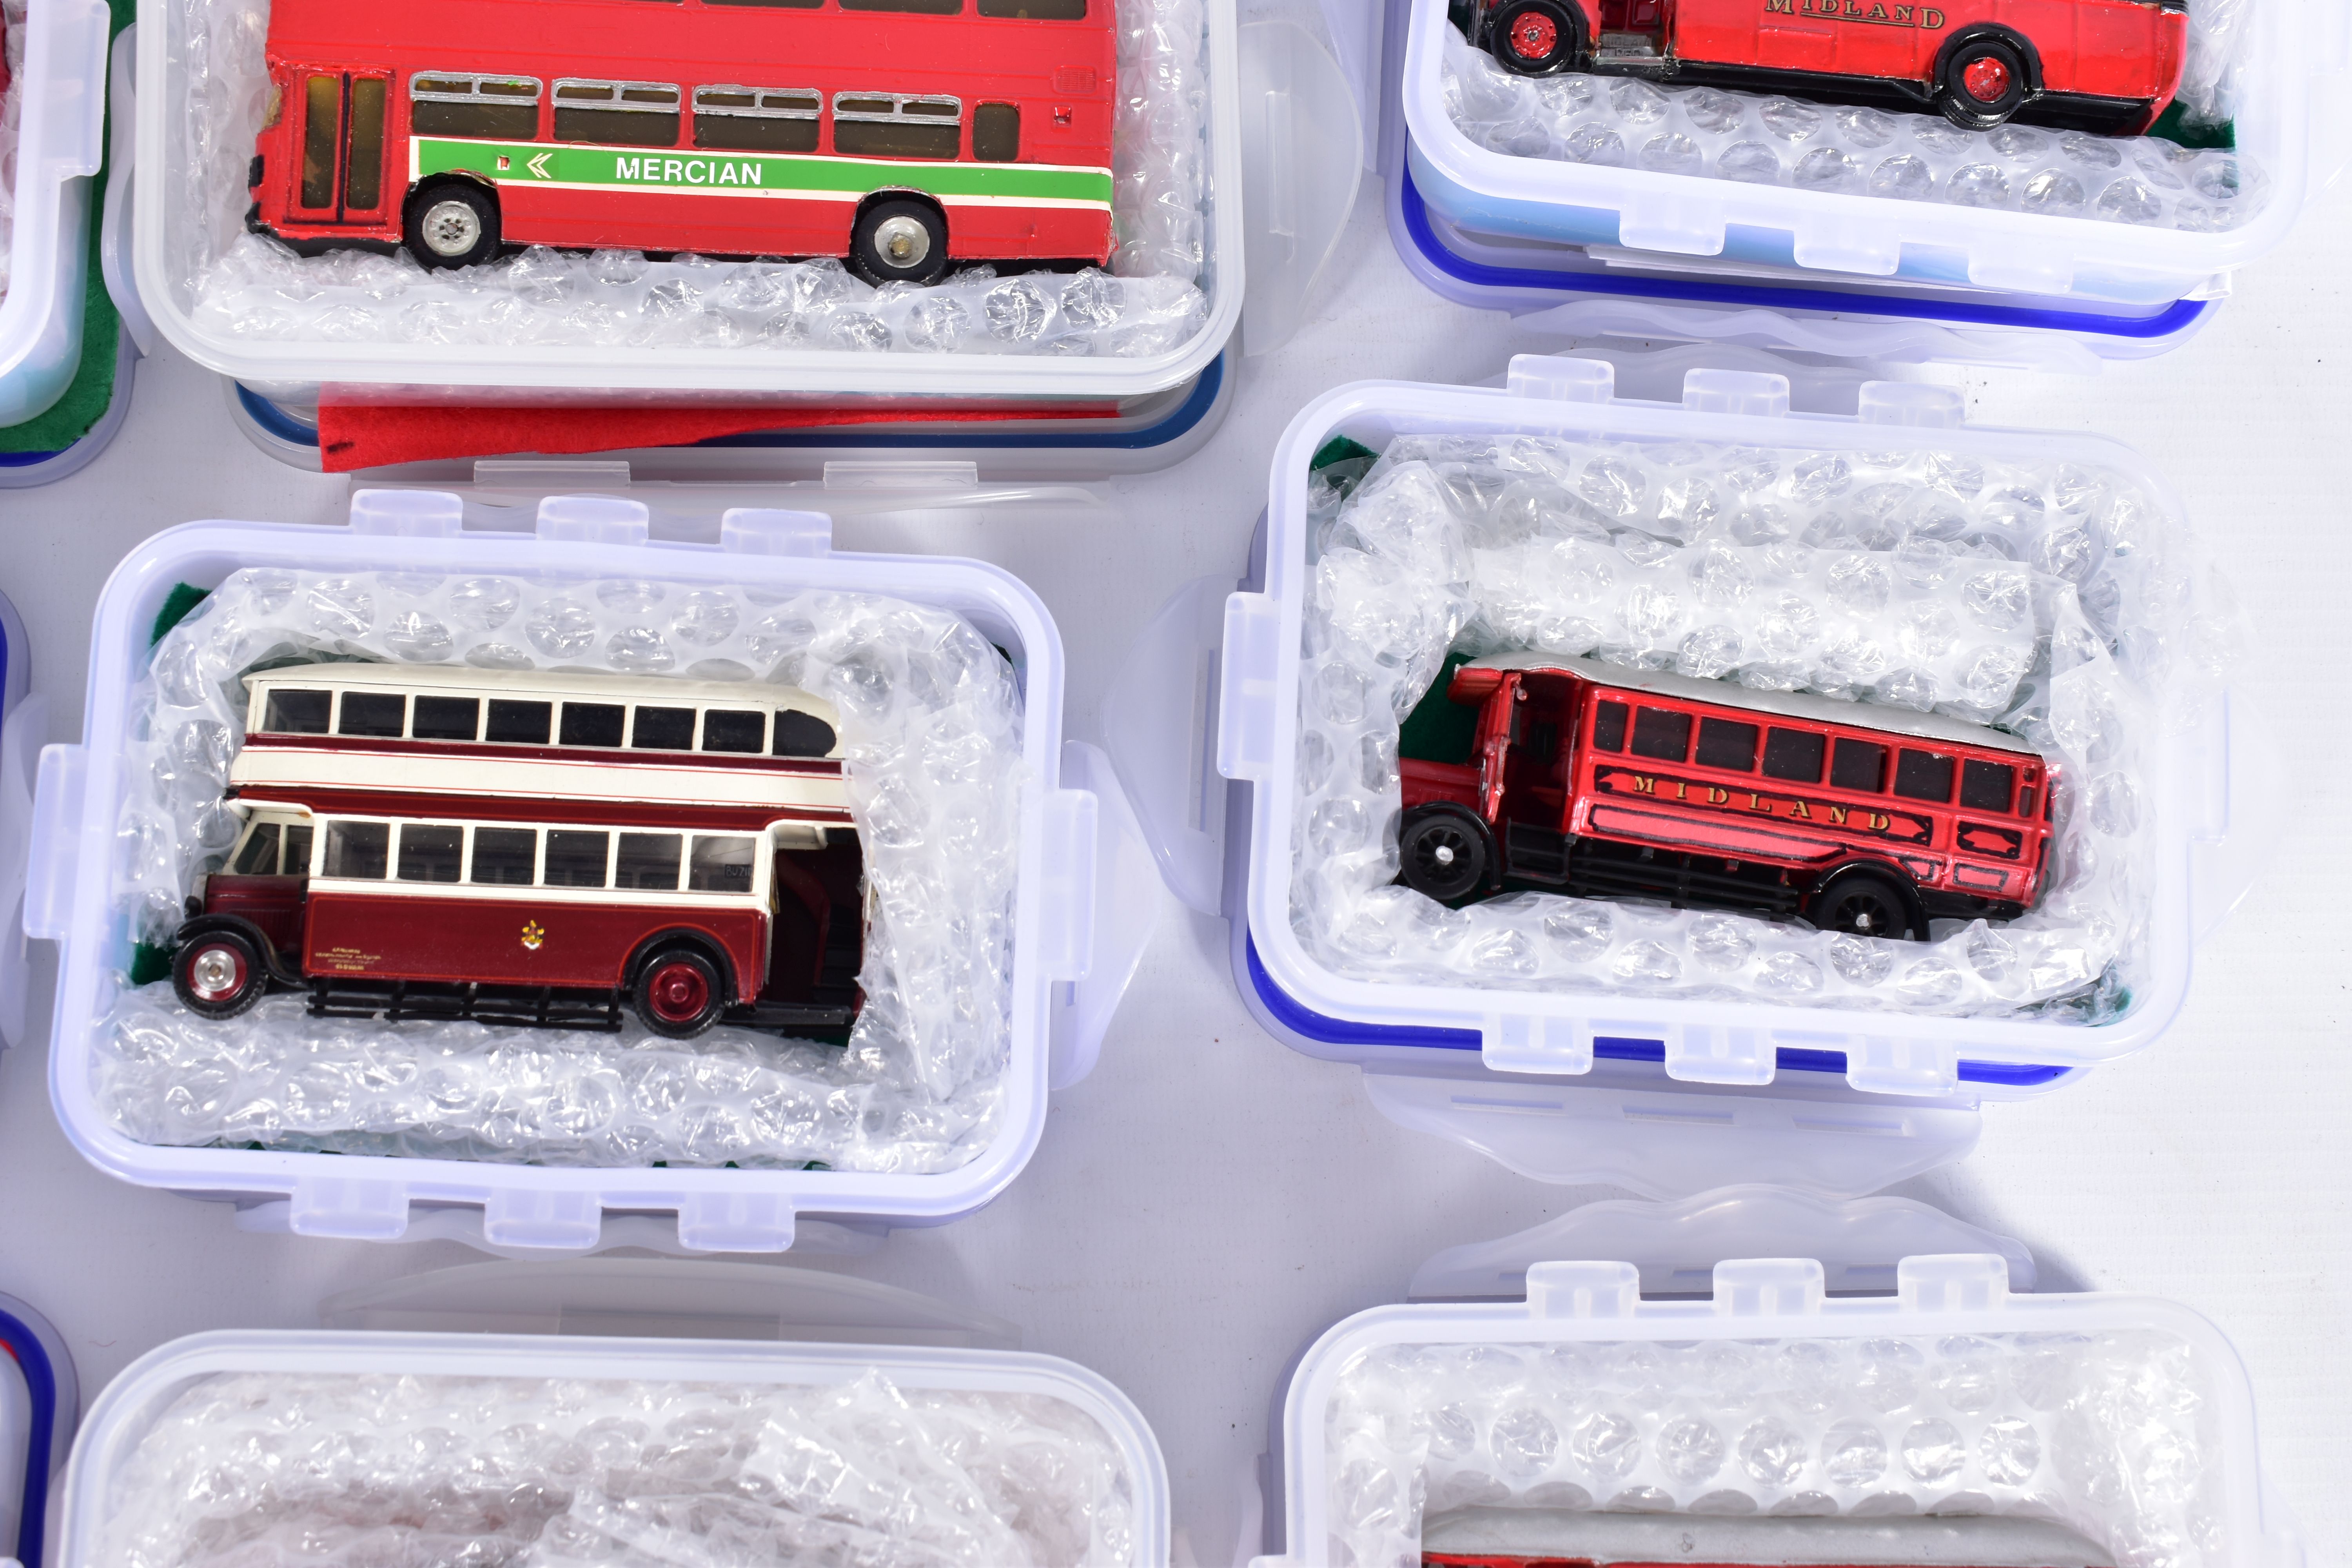 A COLLECTION OF CONSTRUCTED WHITEMETAL KIT MIDLAND RED BUS MODELS, all are 1/76 scale kit models and - Image 3 of 11